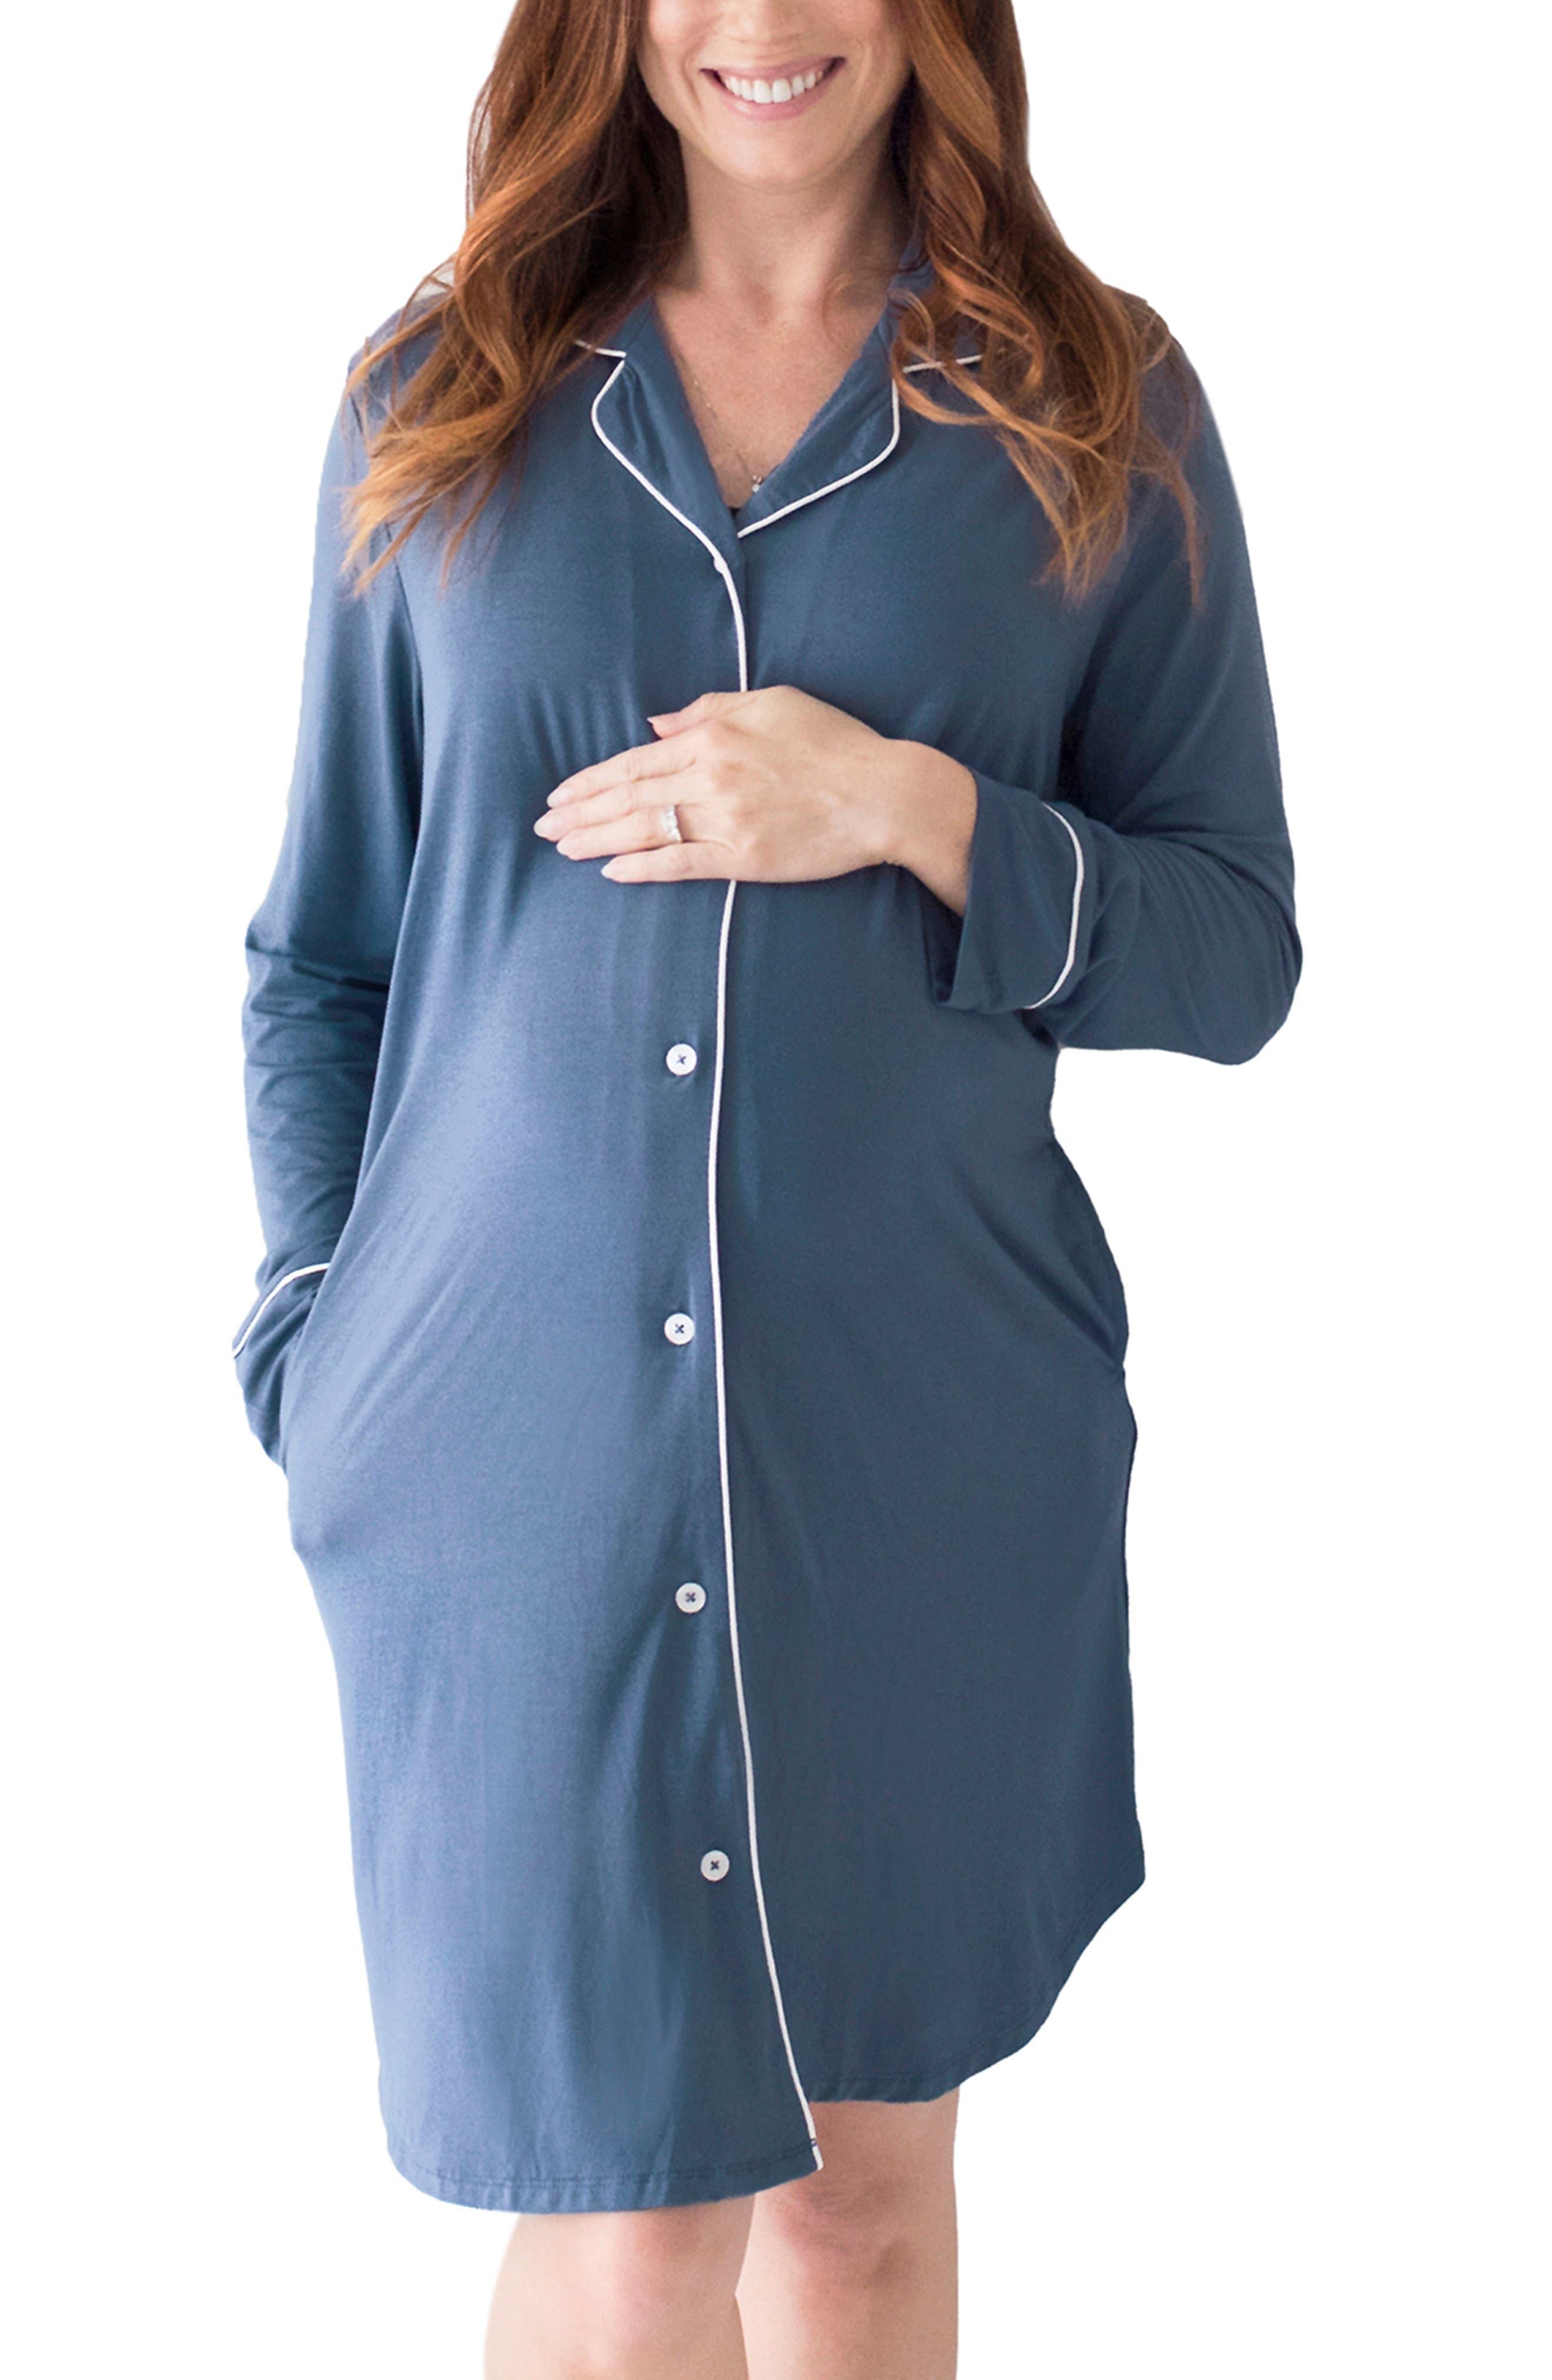 Kindred Bravely Clea Classic Long Sleeve Sleep Shirt in Blue